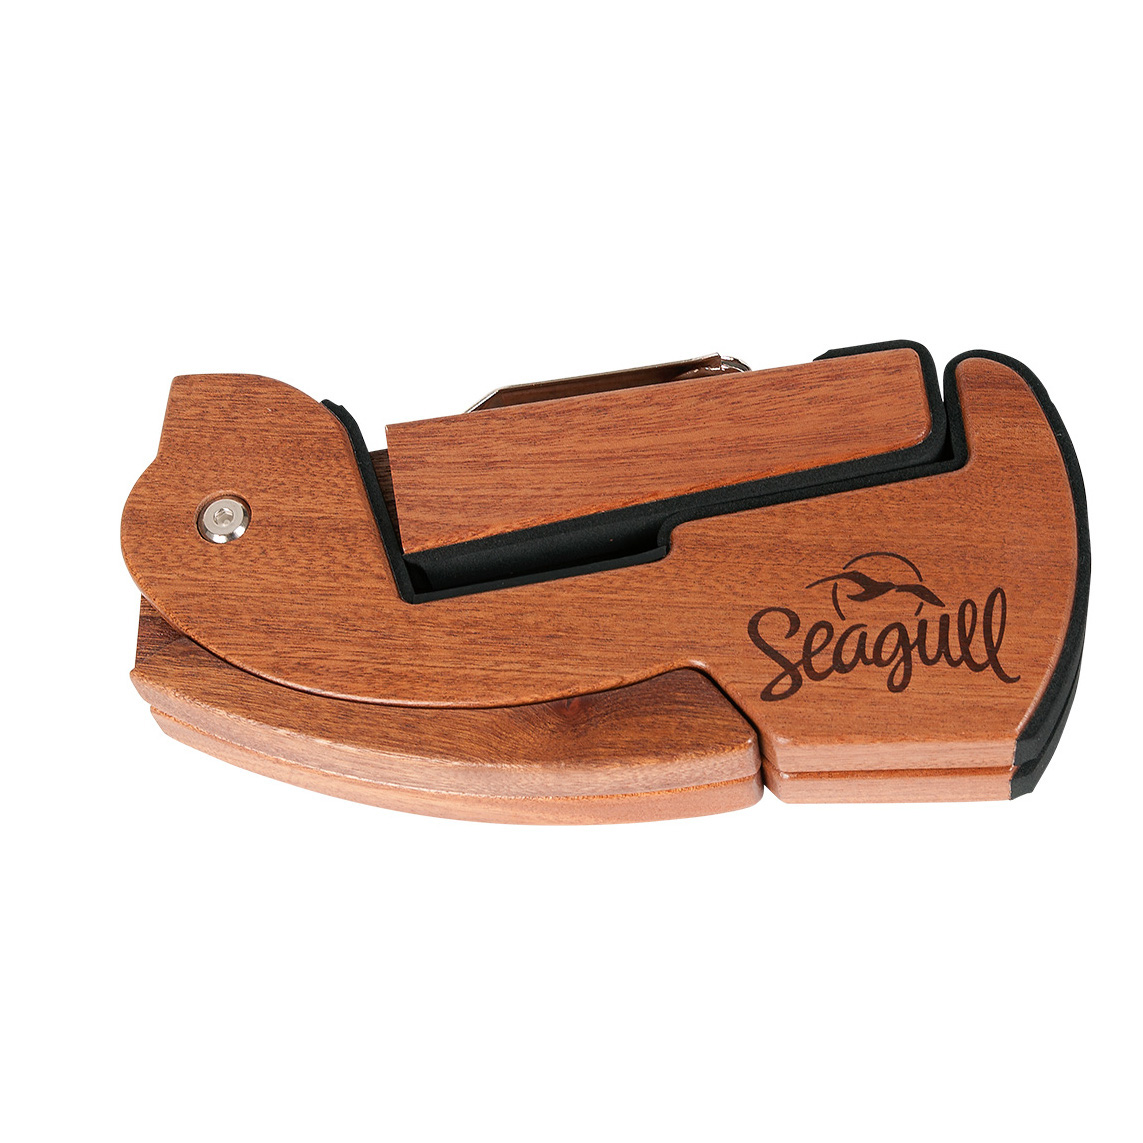 Seagull Pro G stand in Sapele hardwood with Seagull logo 